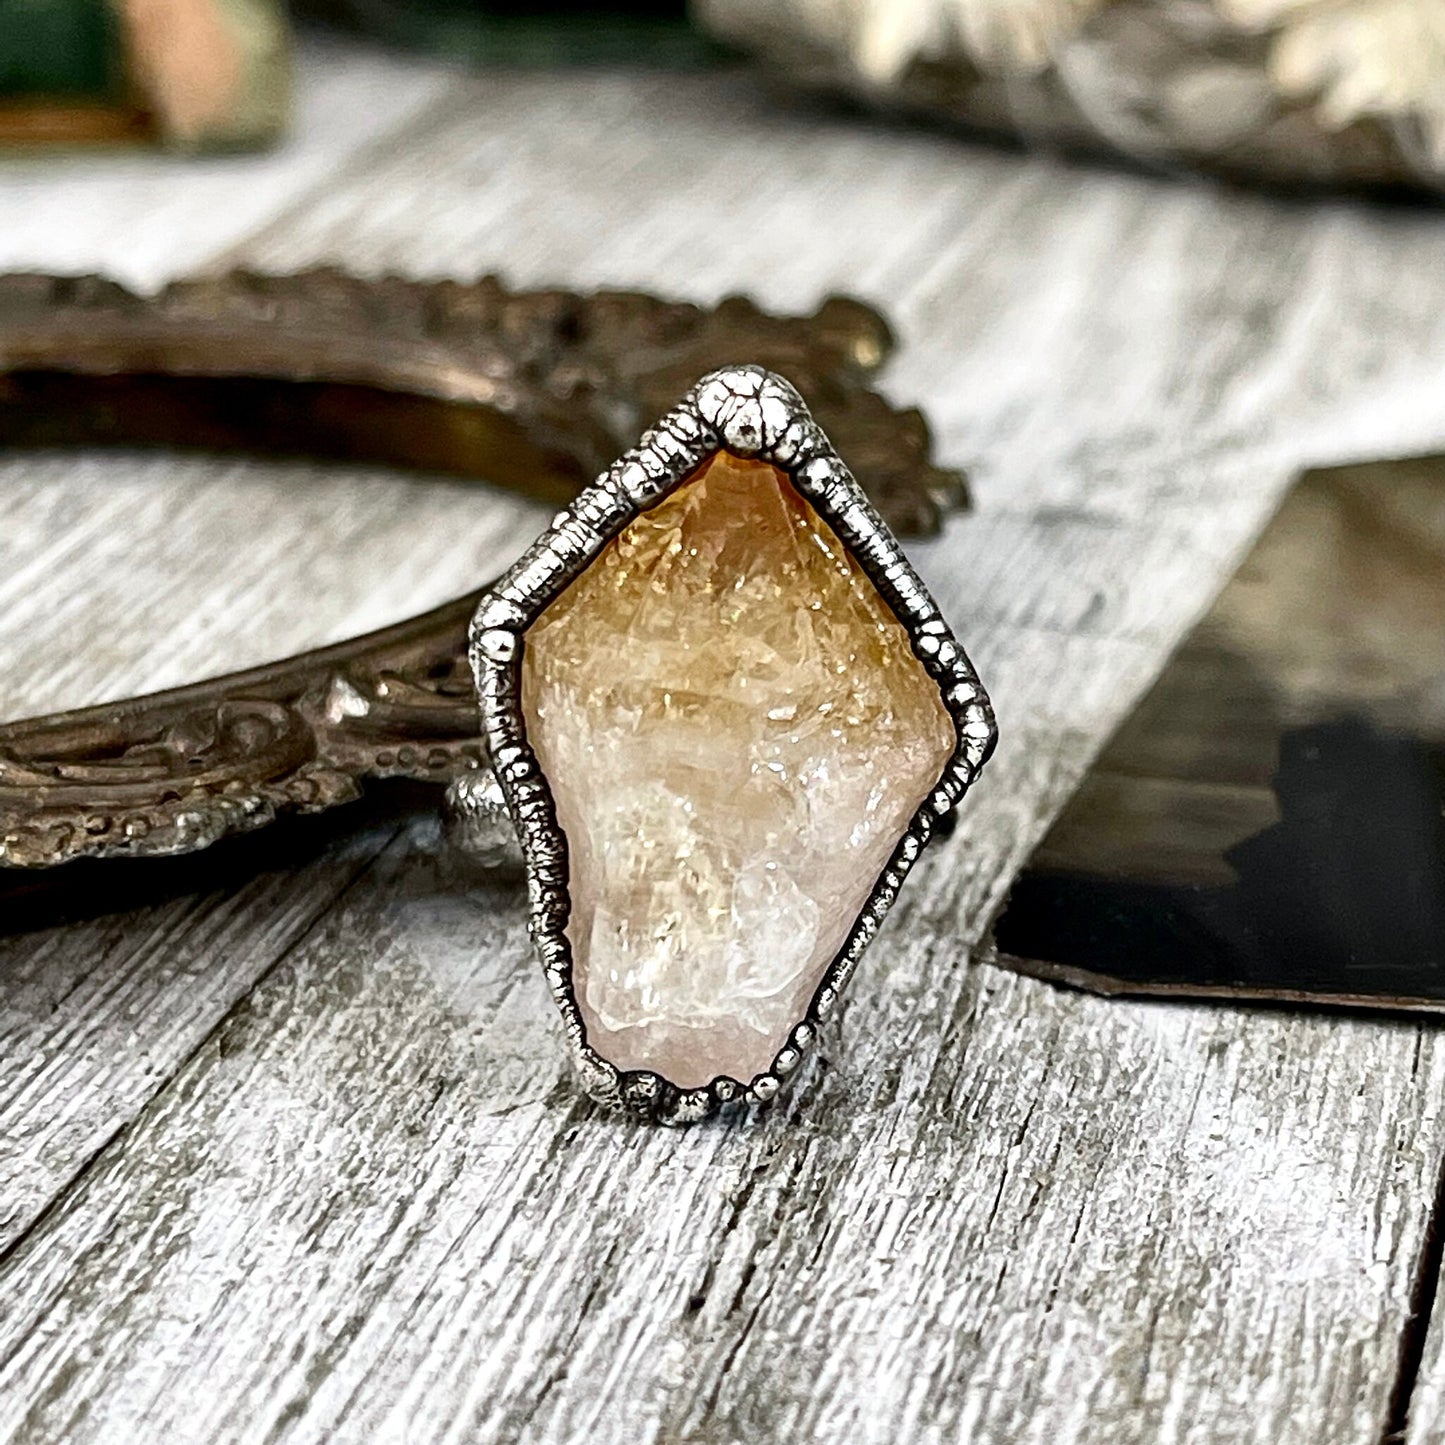 Size 7 Raw Citrine Ring Set in Fine Silver / Foxlark Collection - One of a Kind / Big Crystal Ring Witchy Jewelry / Gothic Jewelry